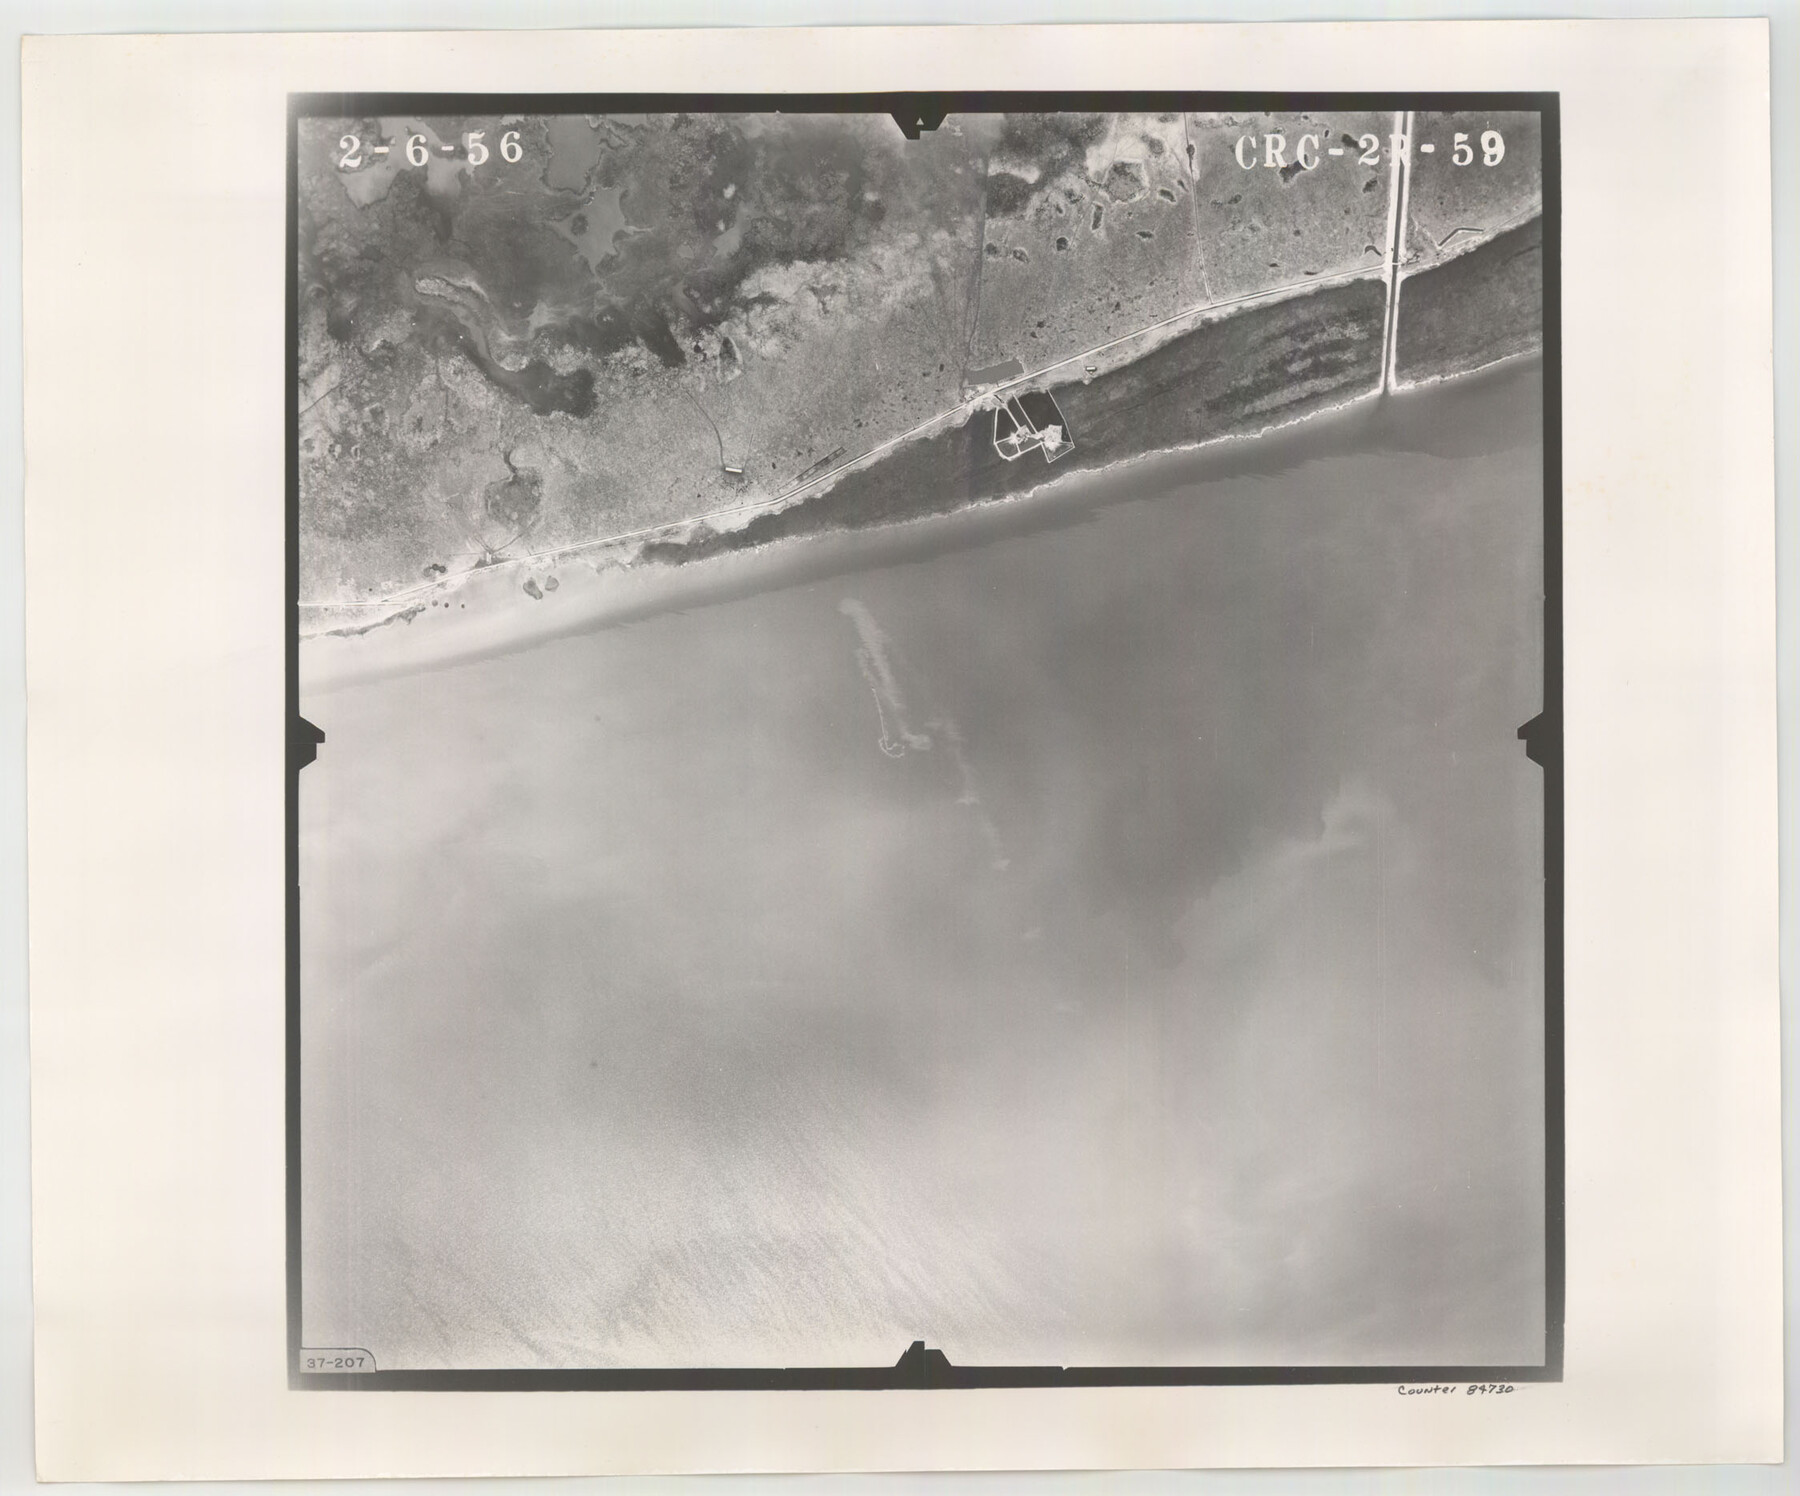 84730, Flight Mission No. CRC-2R, Frame 59, Chambers County, General Map Collection